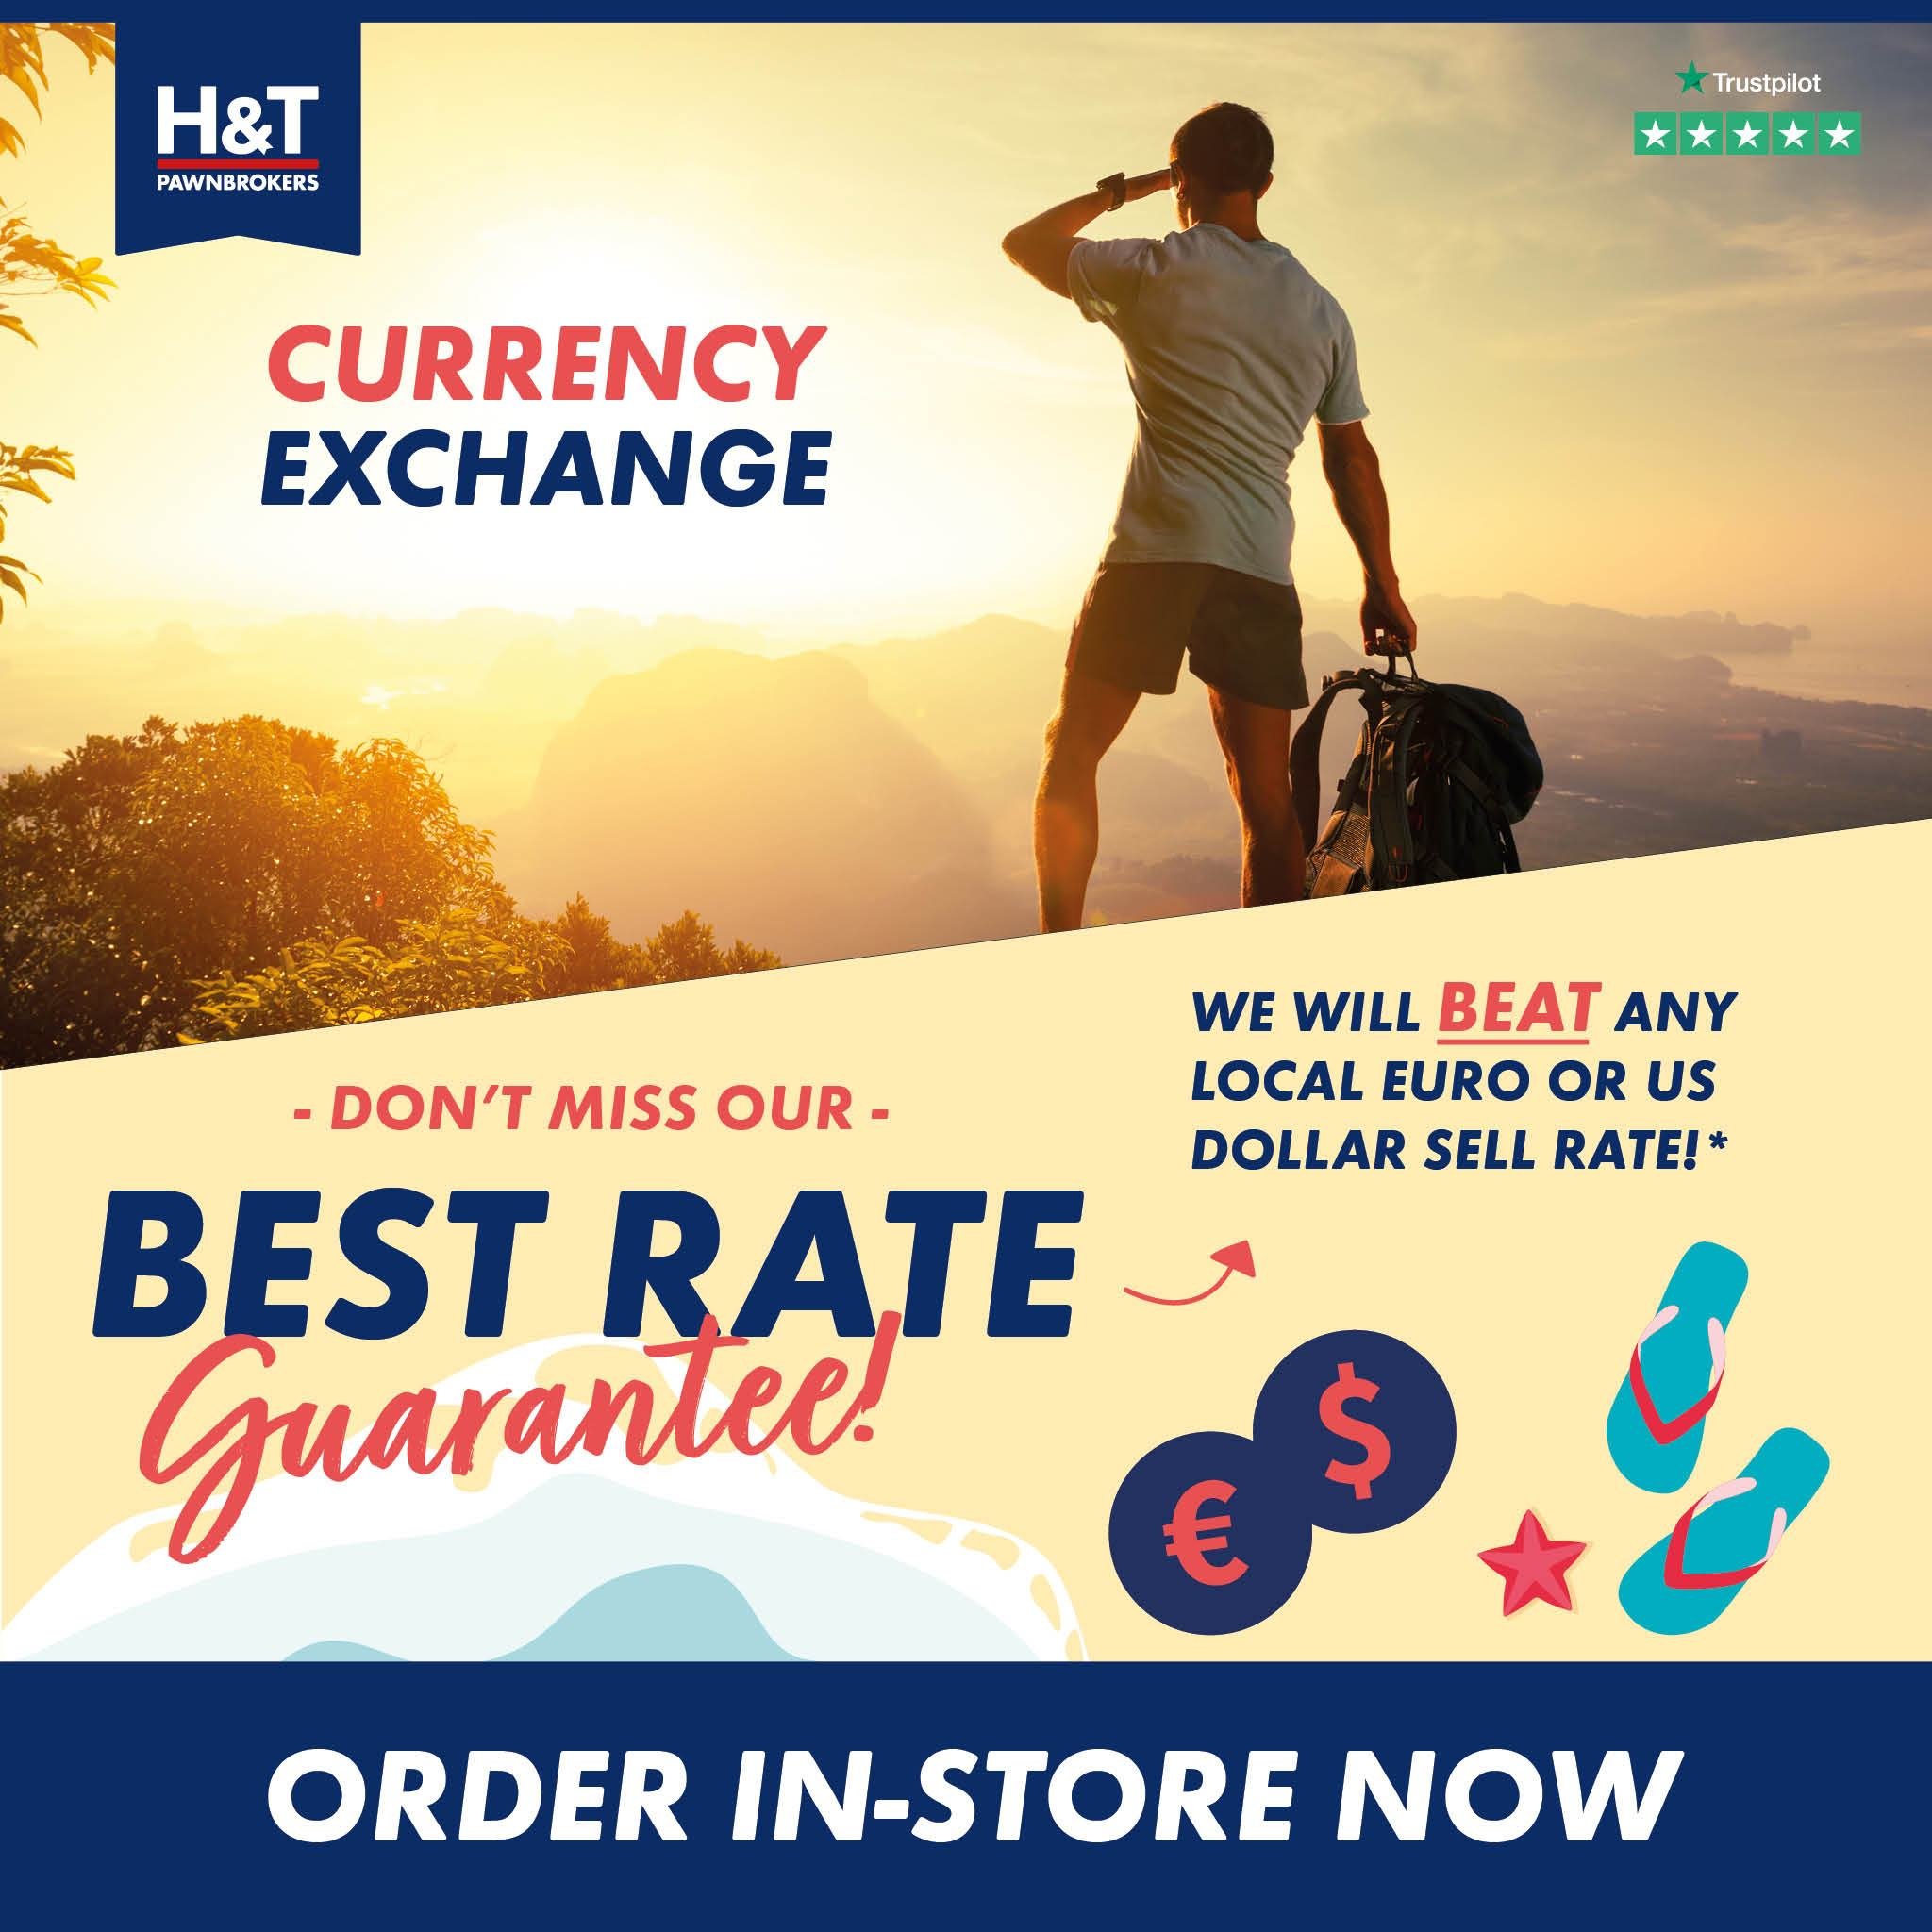 💵💰 Need to exchange currency? 💵💰

Discover currency exchange services at H&amp;T Pawnbrokers in Hemel Town Centre, with a best-rate guarantee! 

📍180 Marlowes, Hemel Hempstead HP1 1BH